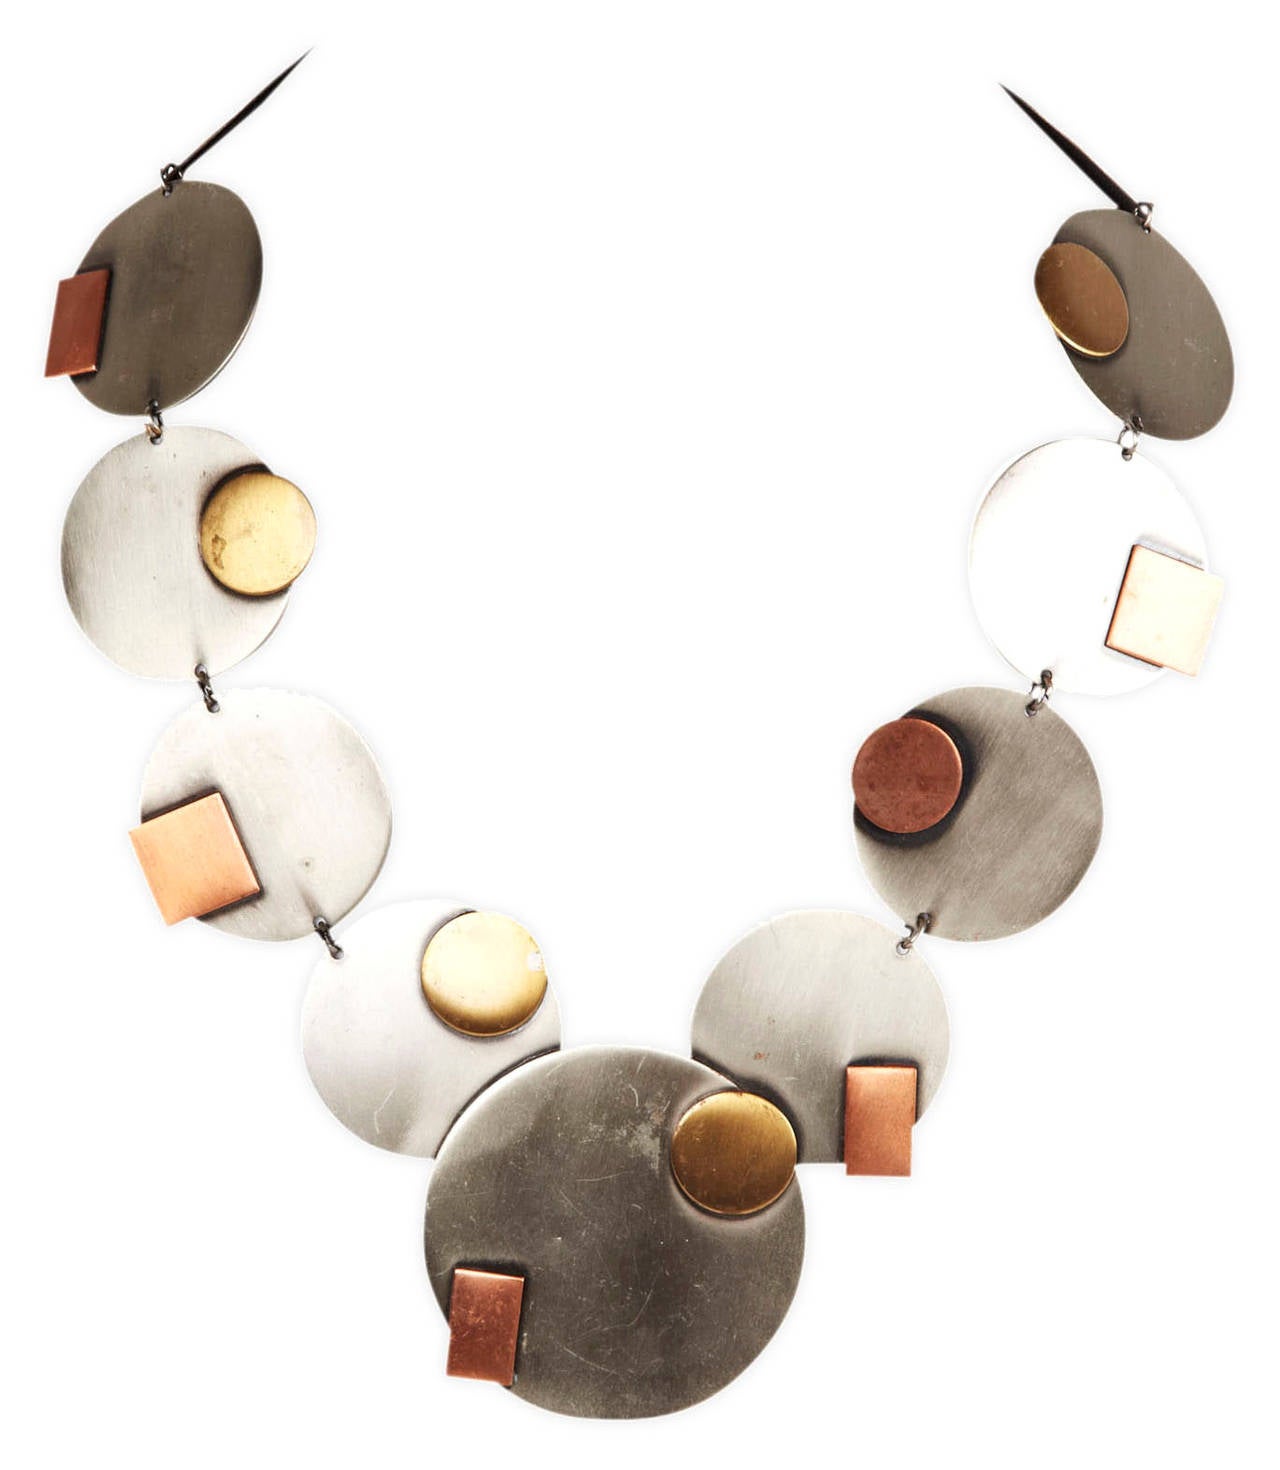 Modernist Geometric mixed metal necklace from the 1980's. Patinaed silvered discs are applied with contrasting copper and brass circles and squares. Large and striking in scale. 18.5